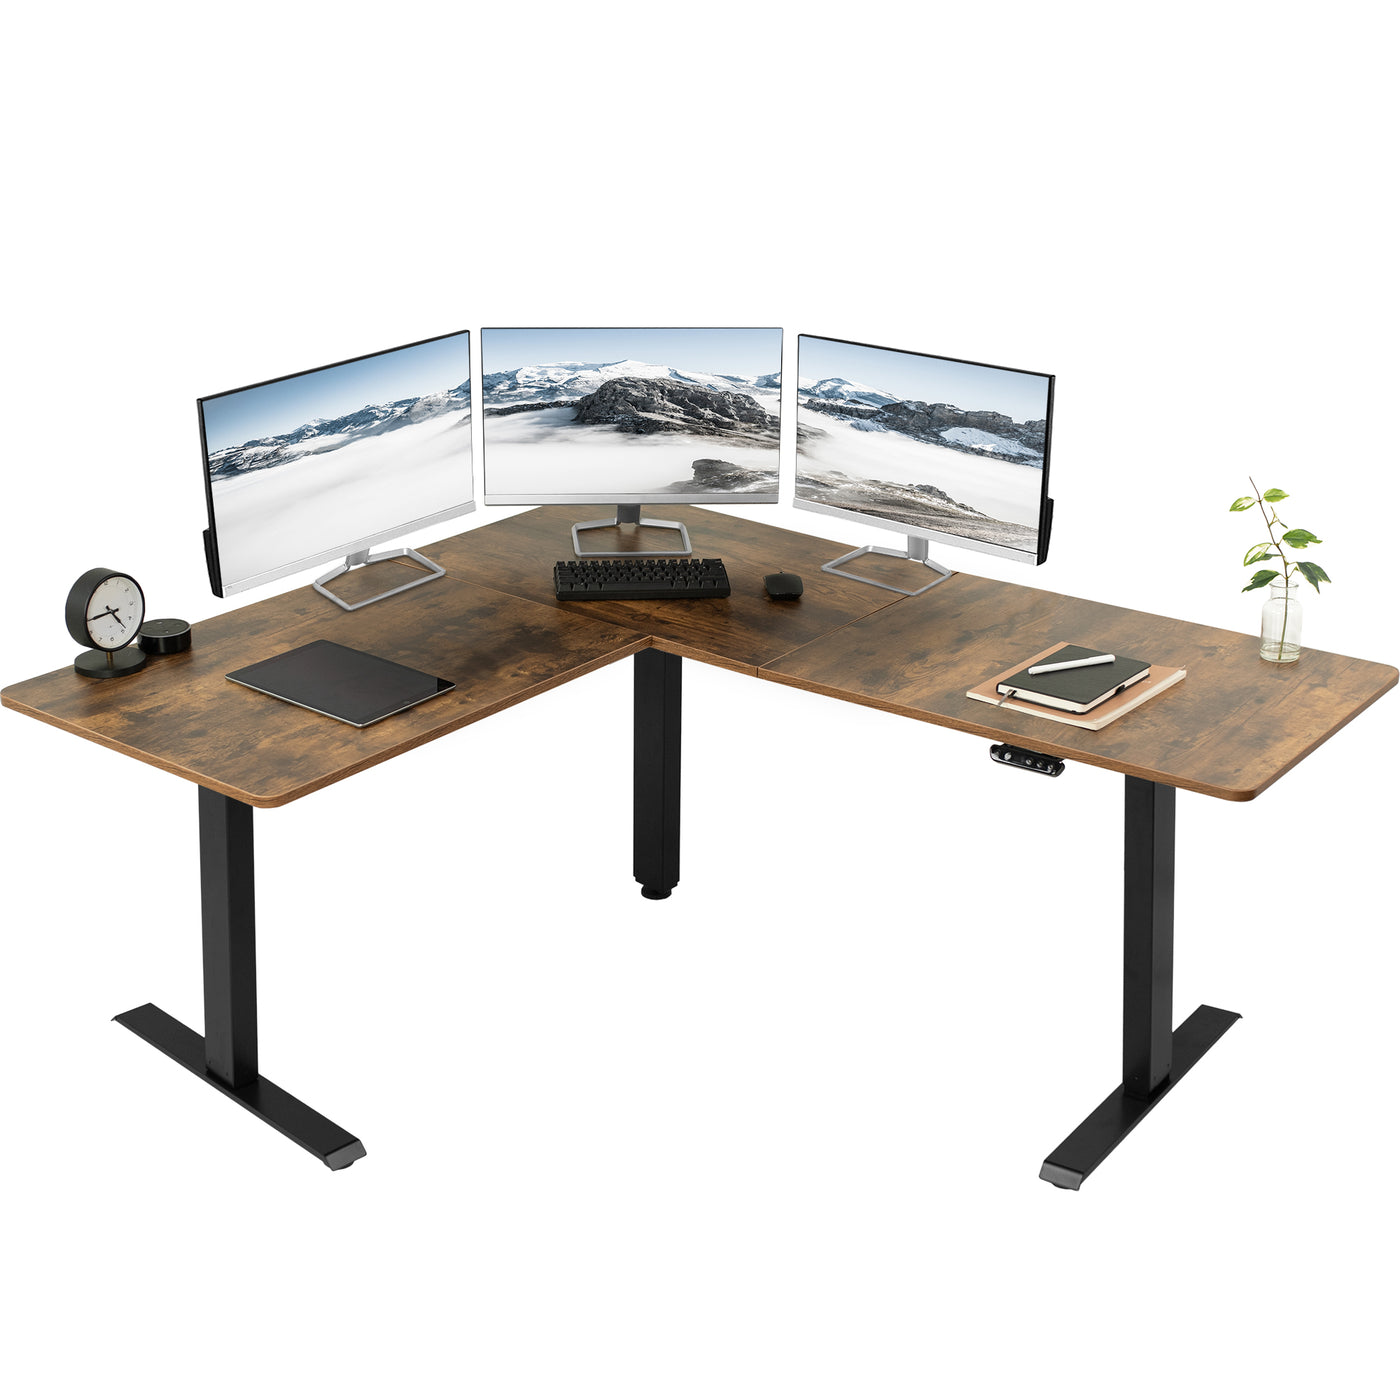 Heavy-duty, rustic, electric height adjustable corner desk workstation for active sit or stand efficient workspace.